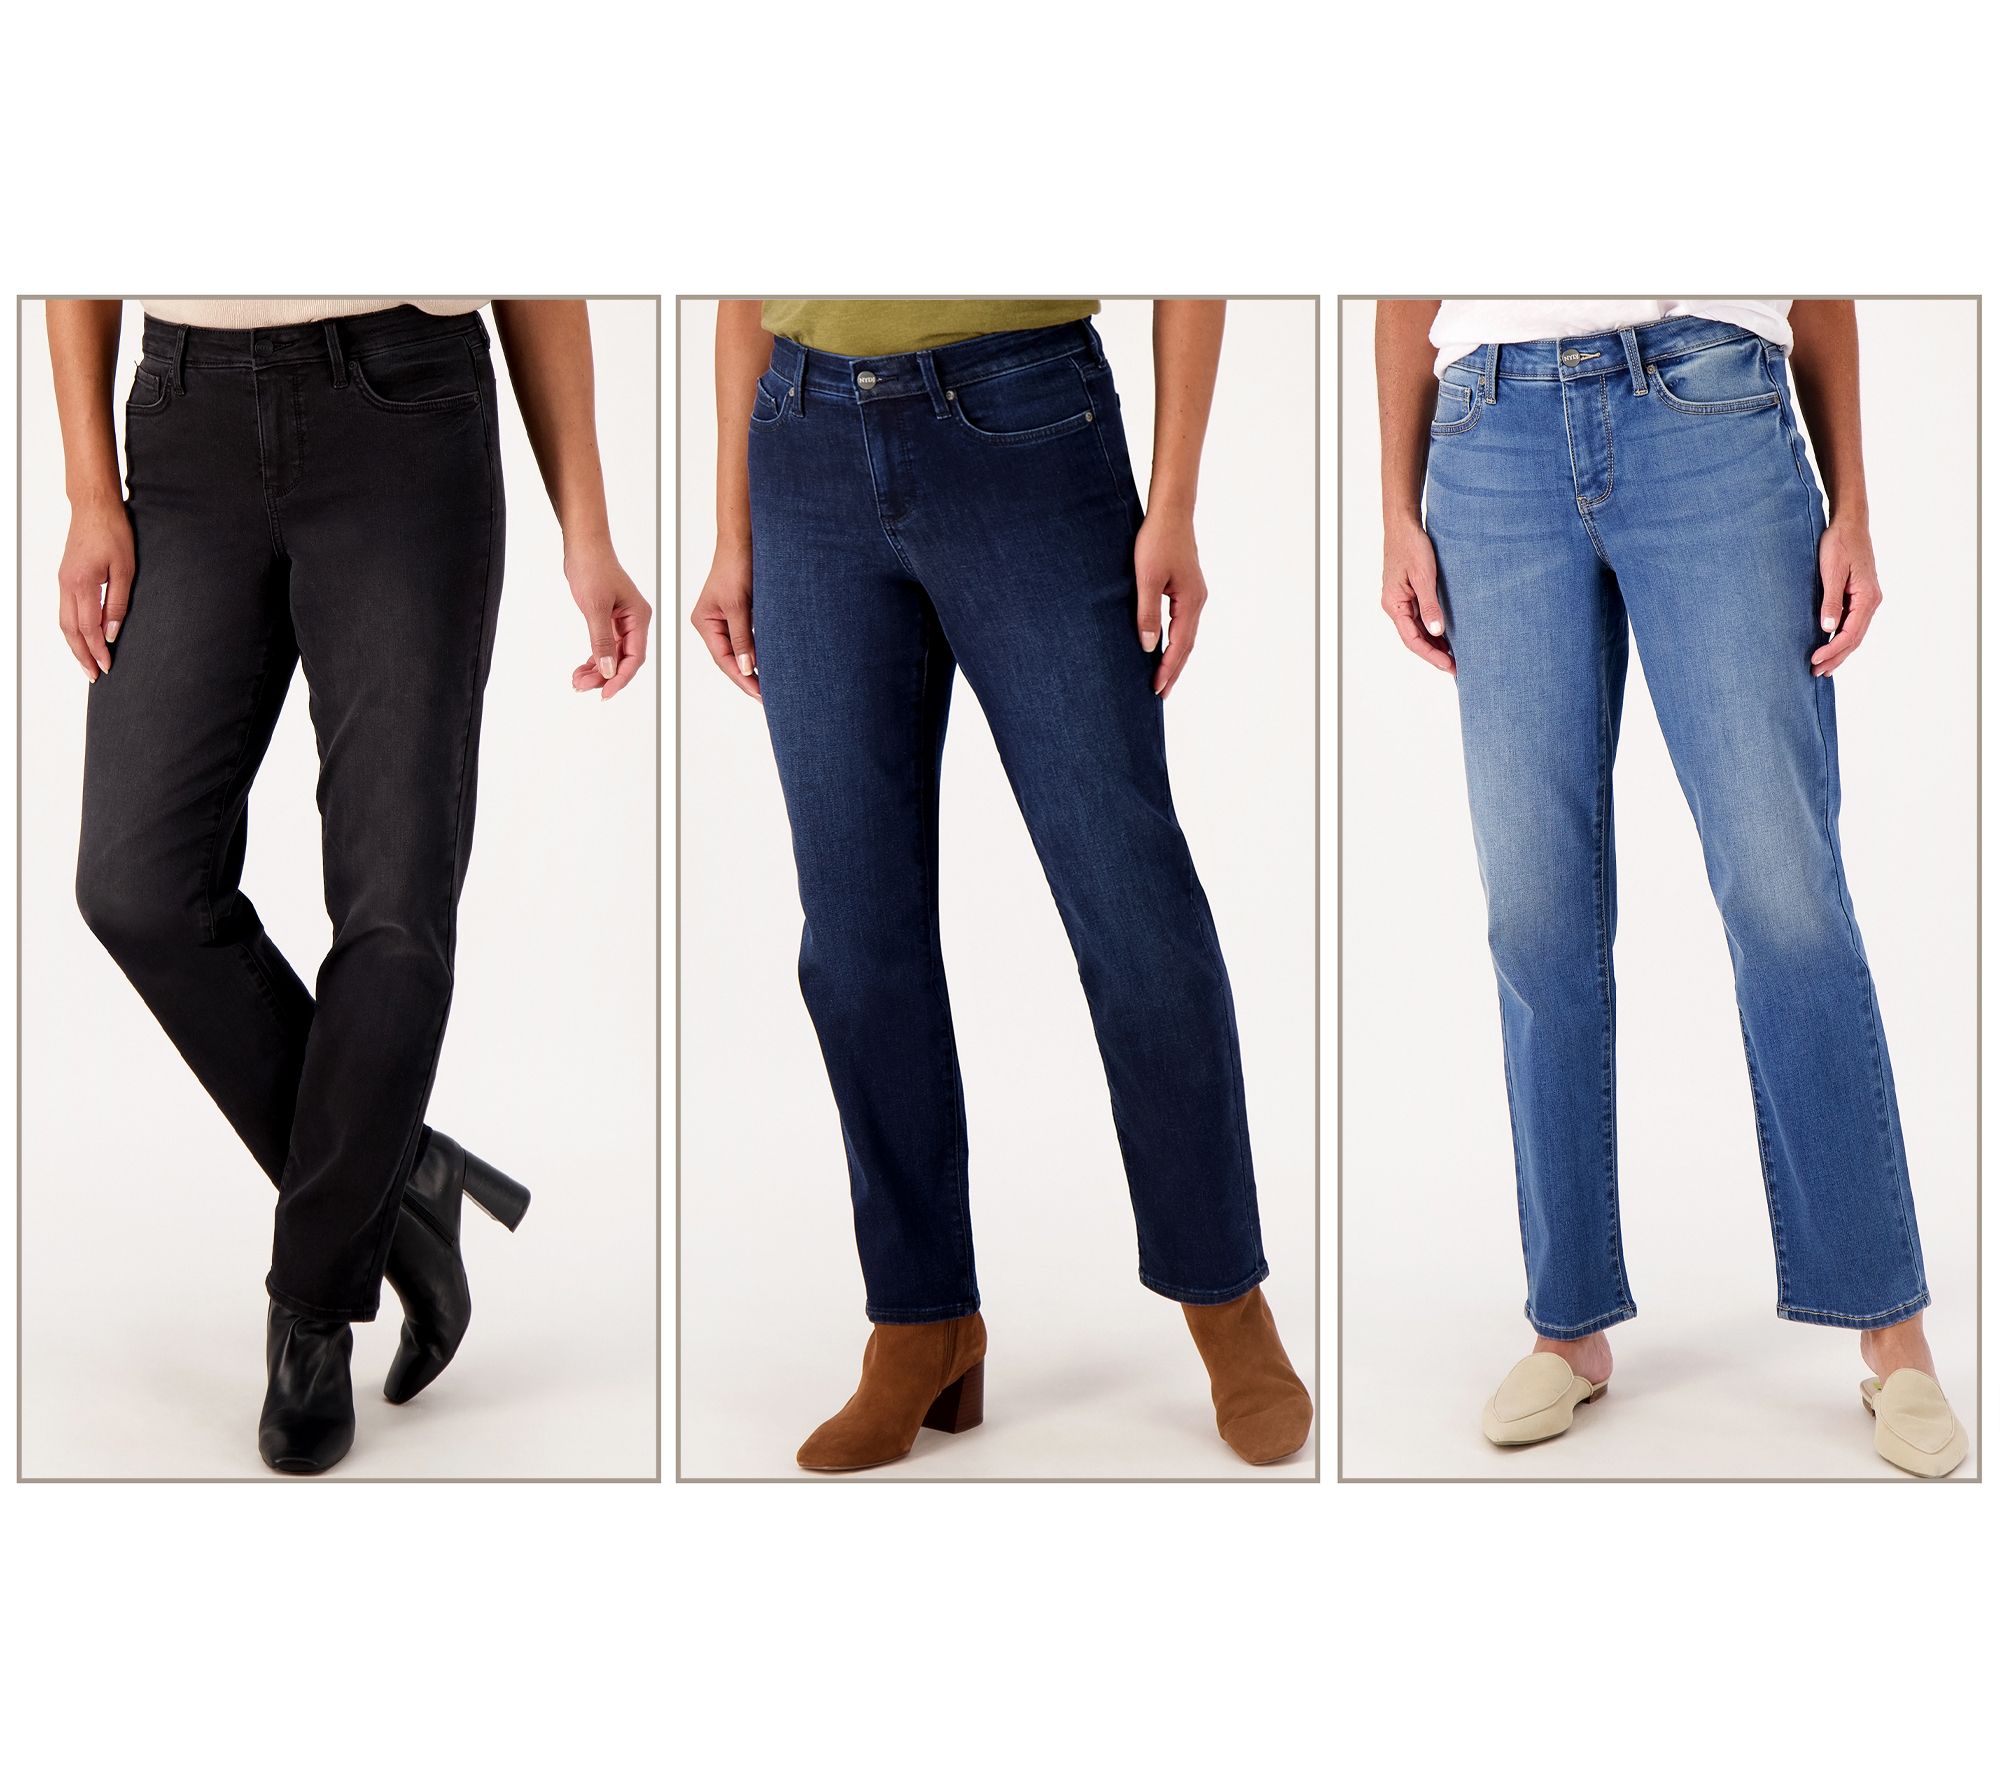 NYDJ Relaxed Slender Jeans - QVC.com